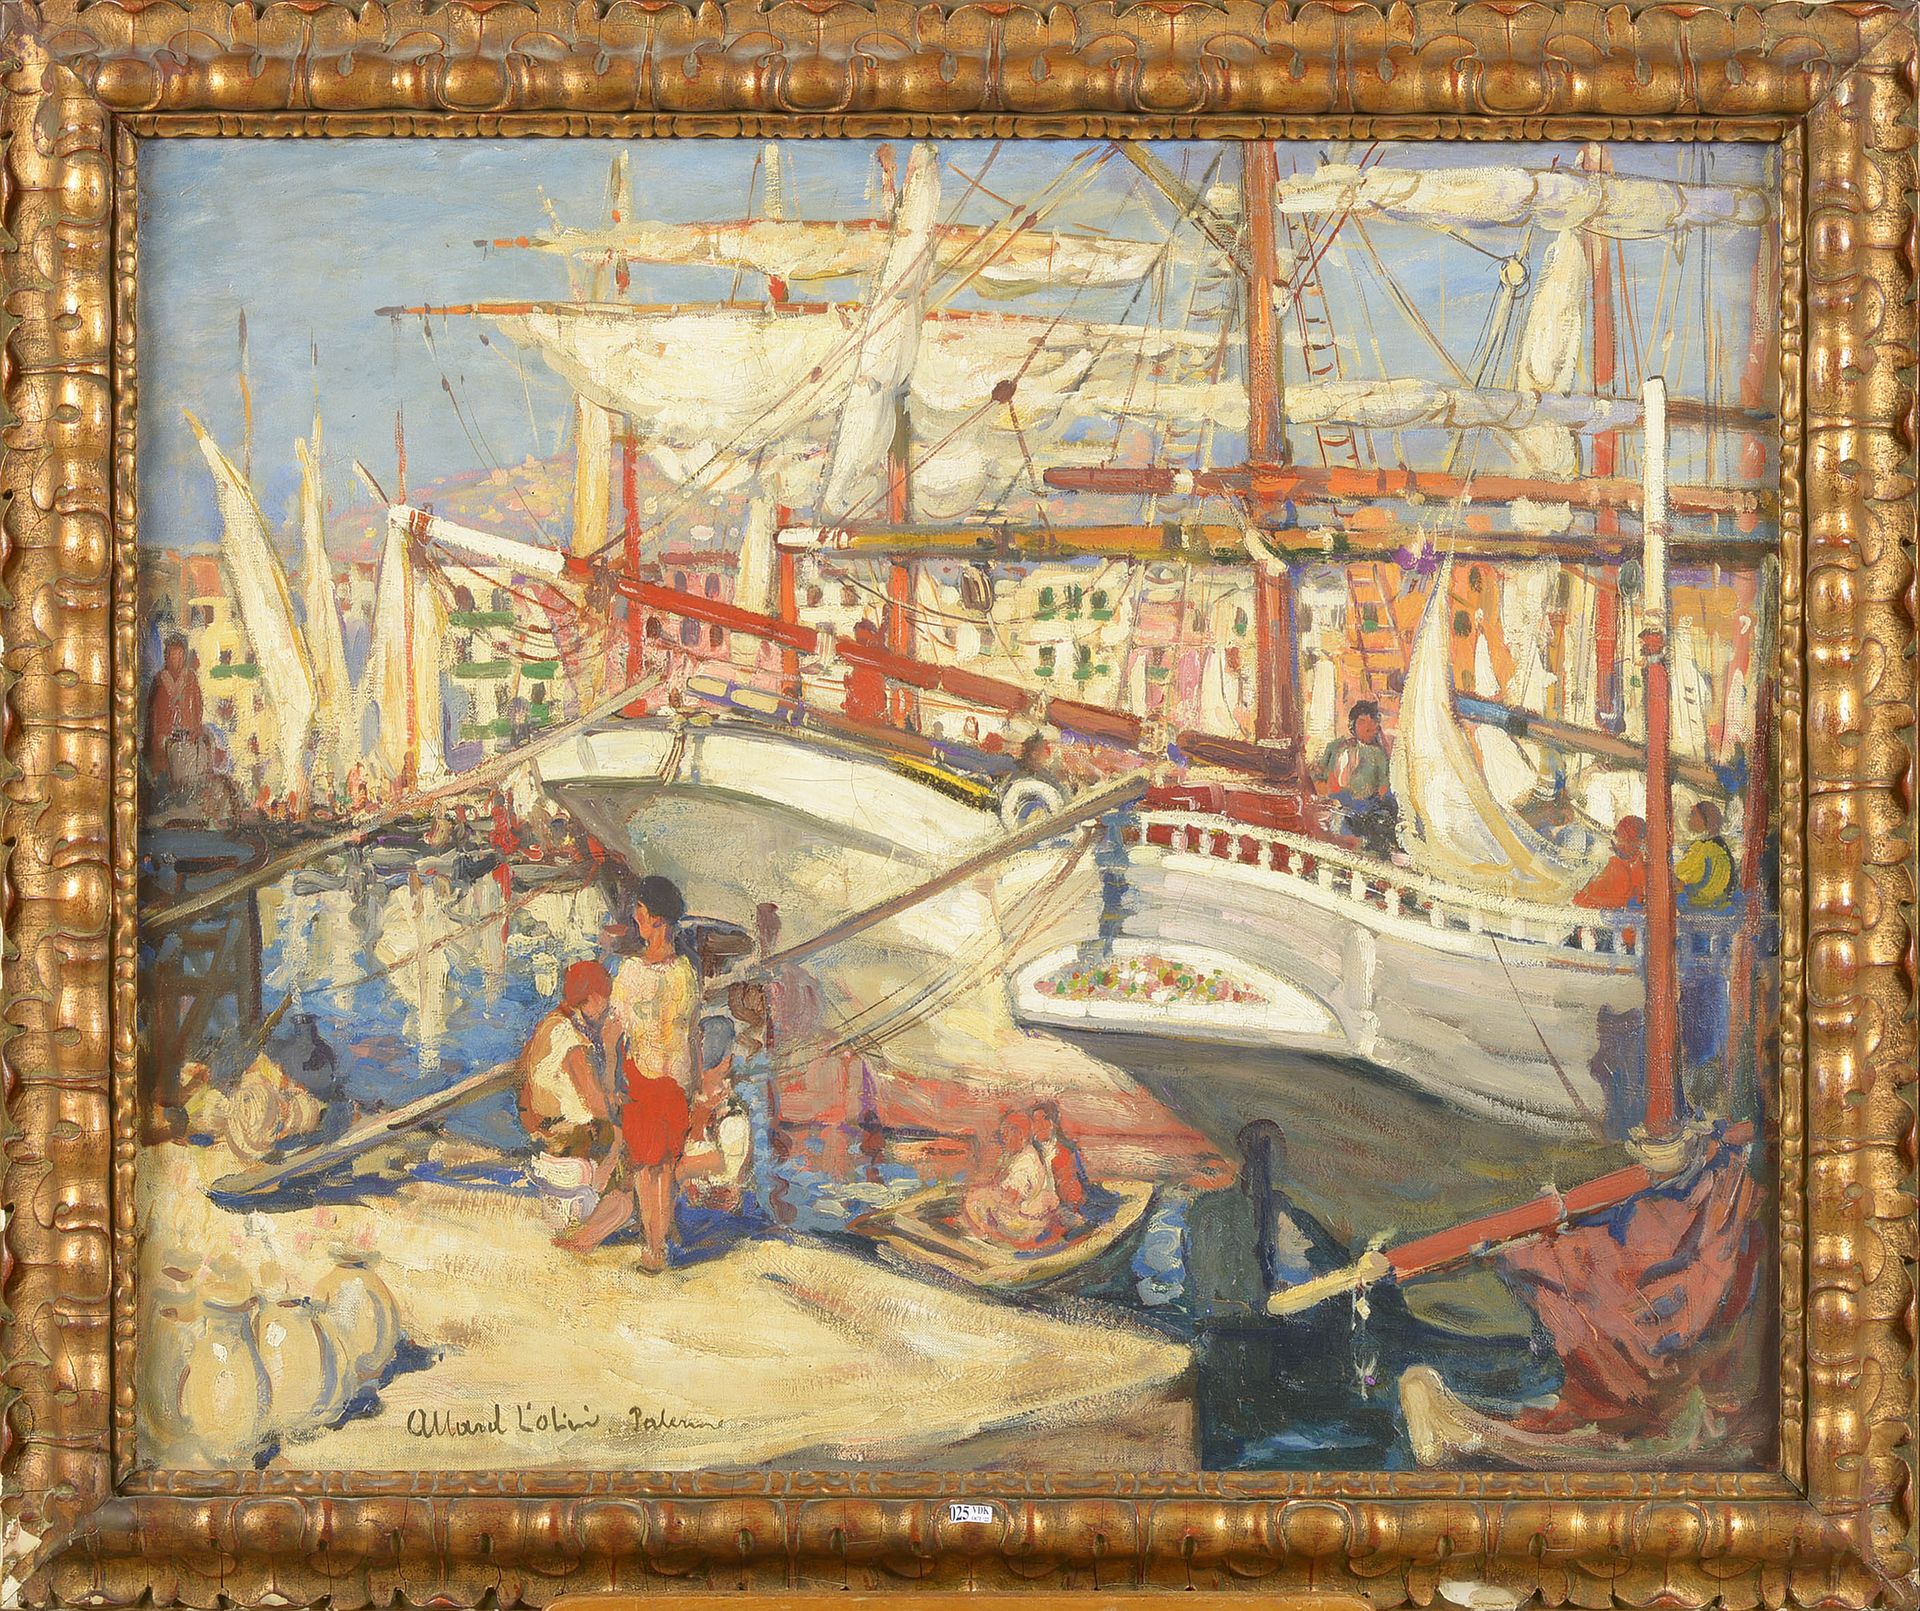 ALLARD L'OLIVIER Fernand (1883 - 1933) Oil on canvas "View of the port of Palerm&hellip;